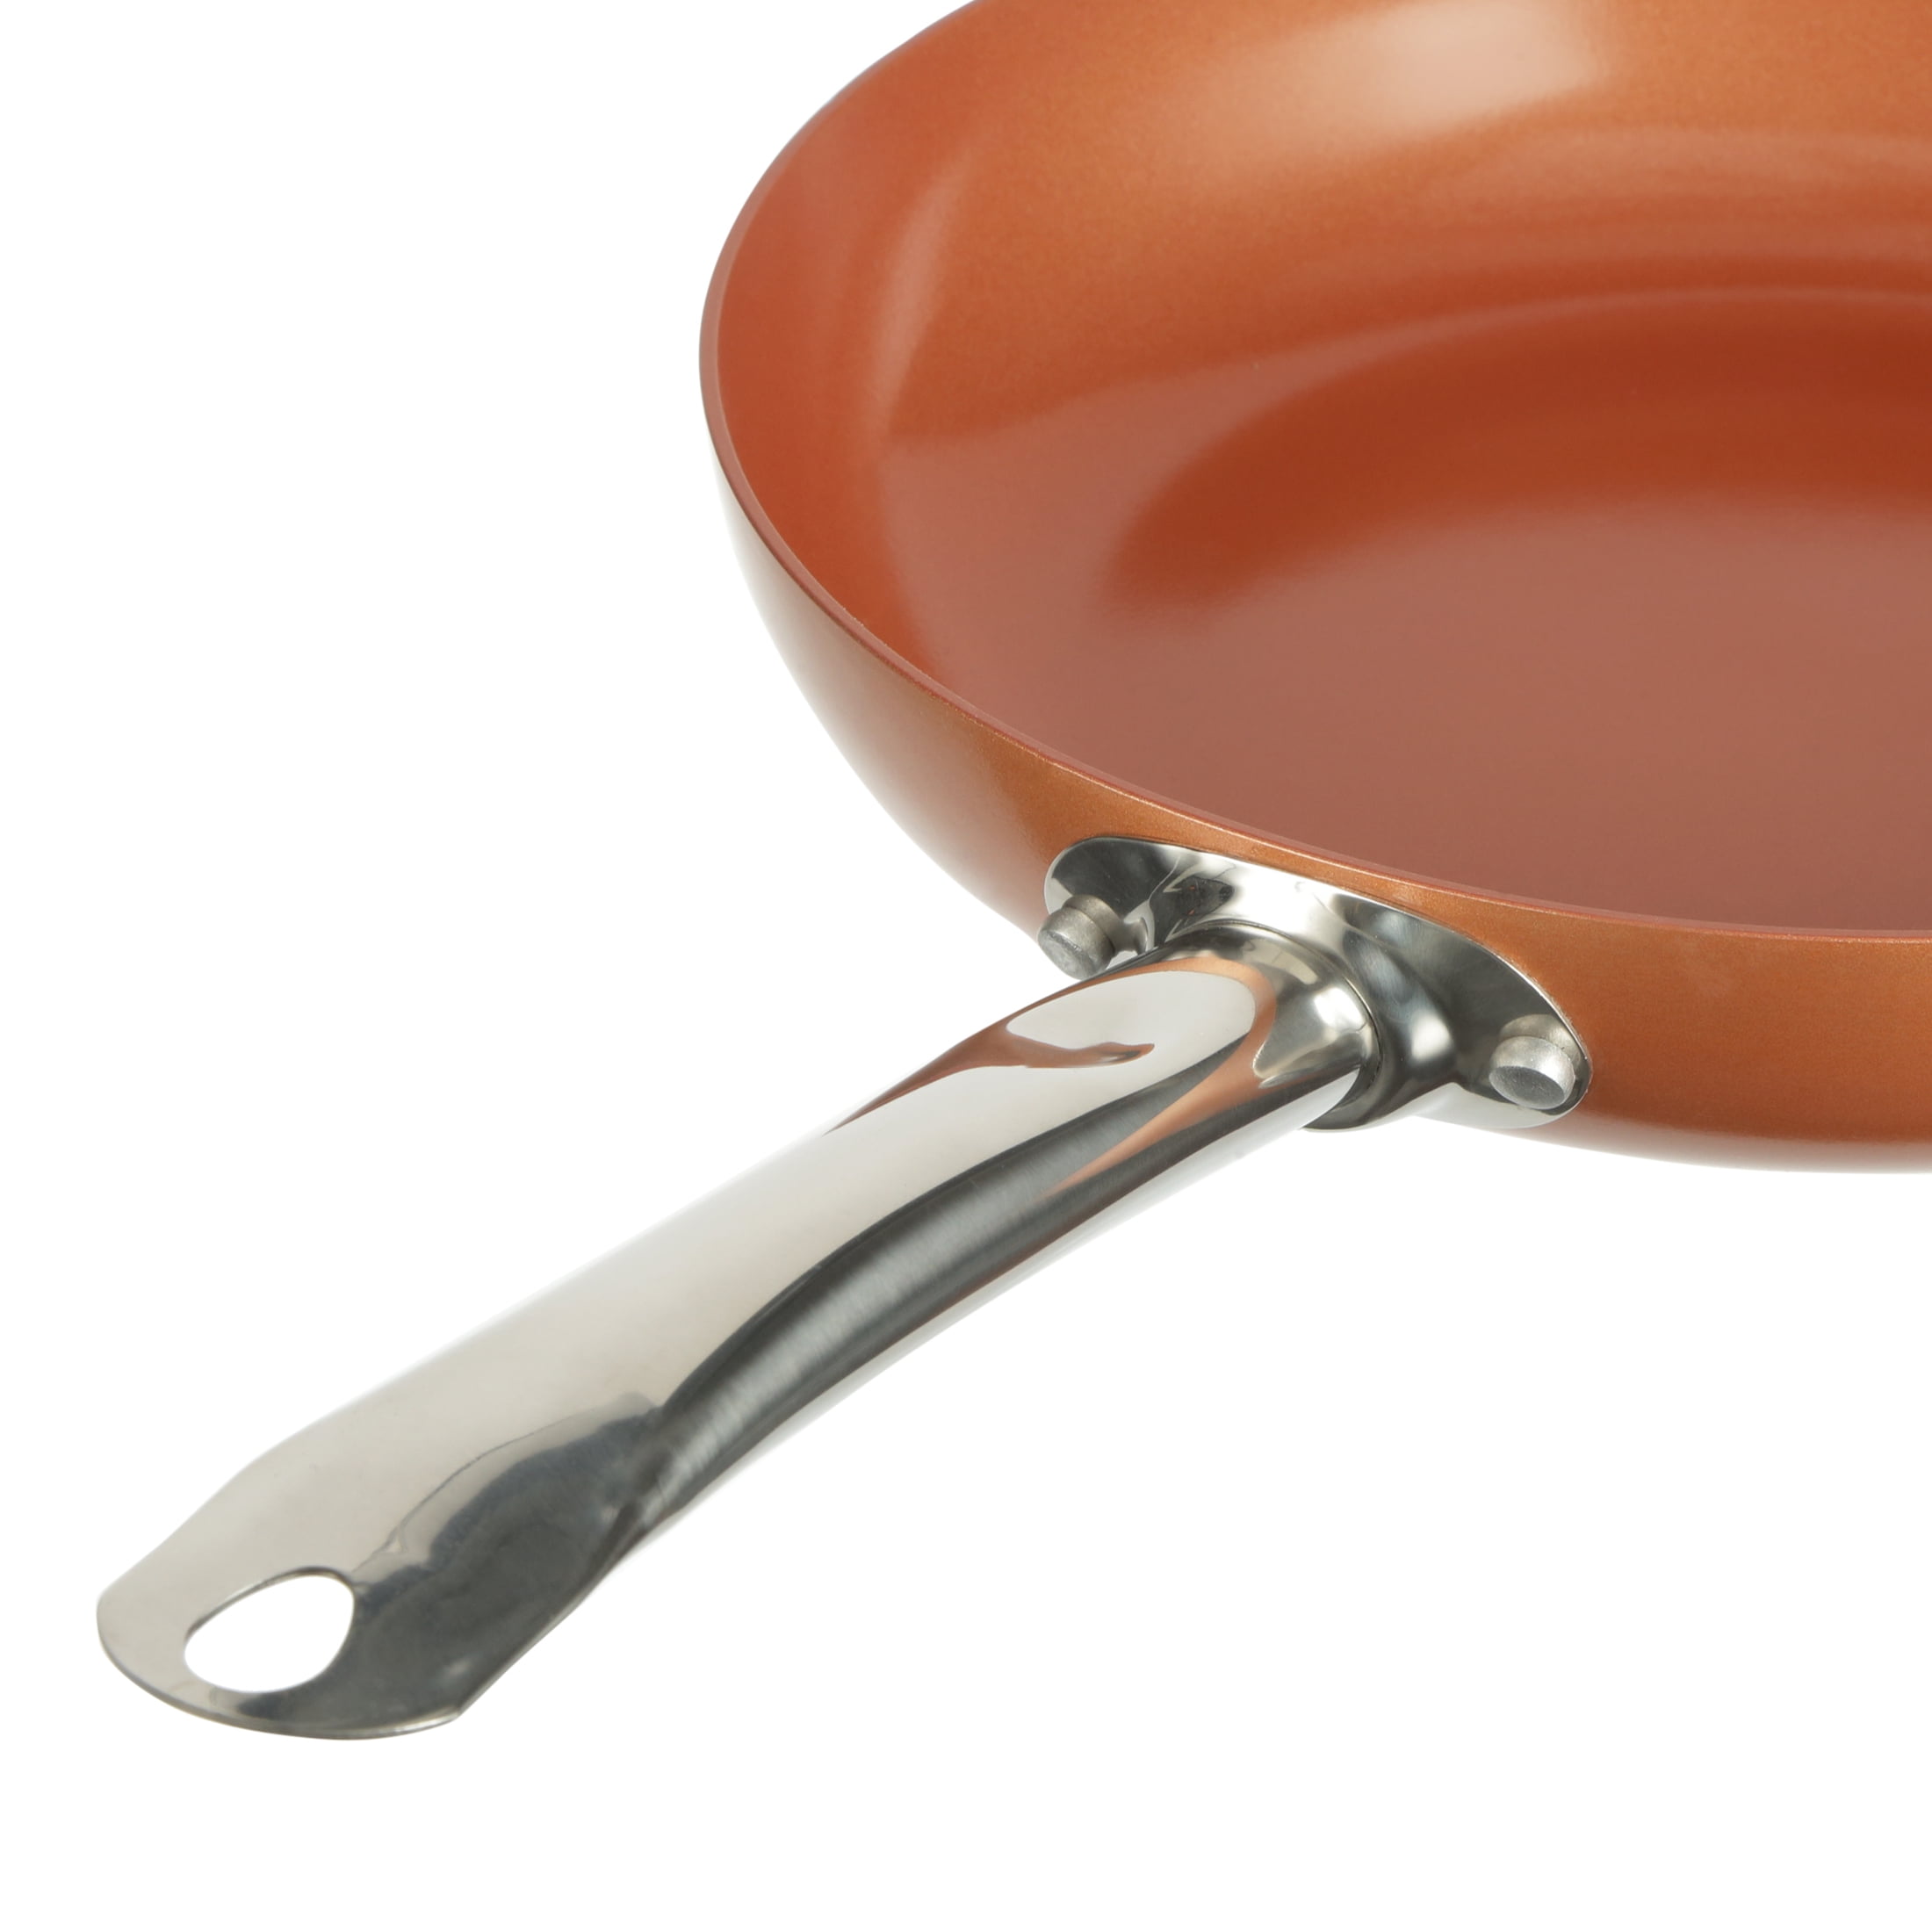 Dropship Hammered 10 Inch, Non-Stick Frying Pan With Lid, Ceramic Cookware,  Skillet, Premium, PFOA Free, Dishwasher Safe, Copper to Sell Online at a  Lower Price